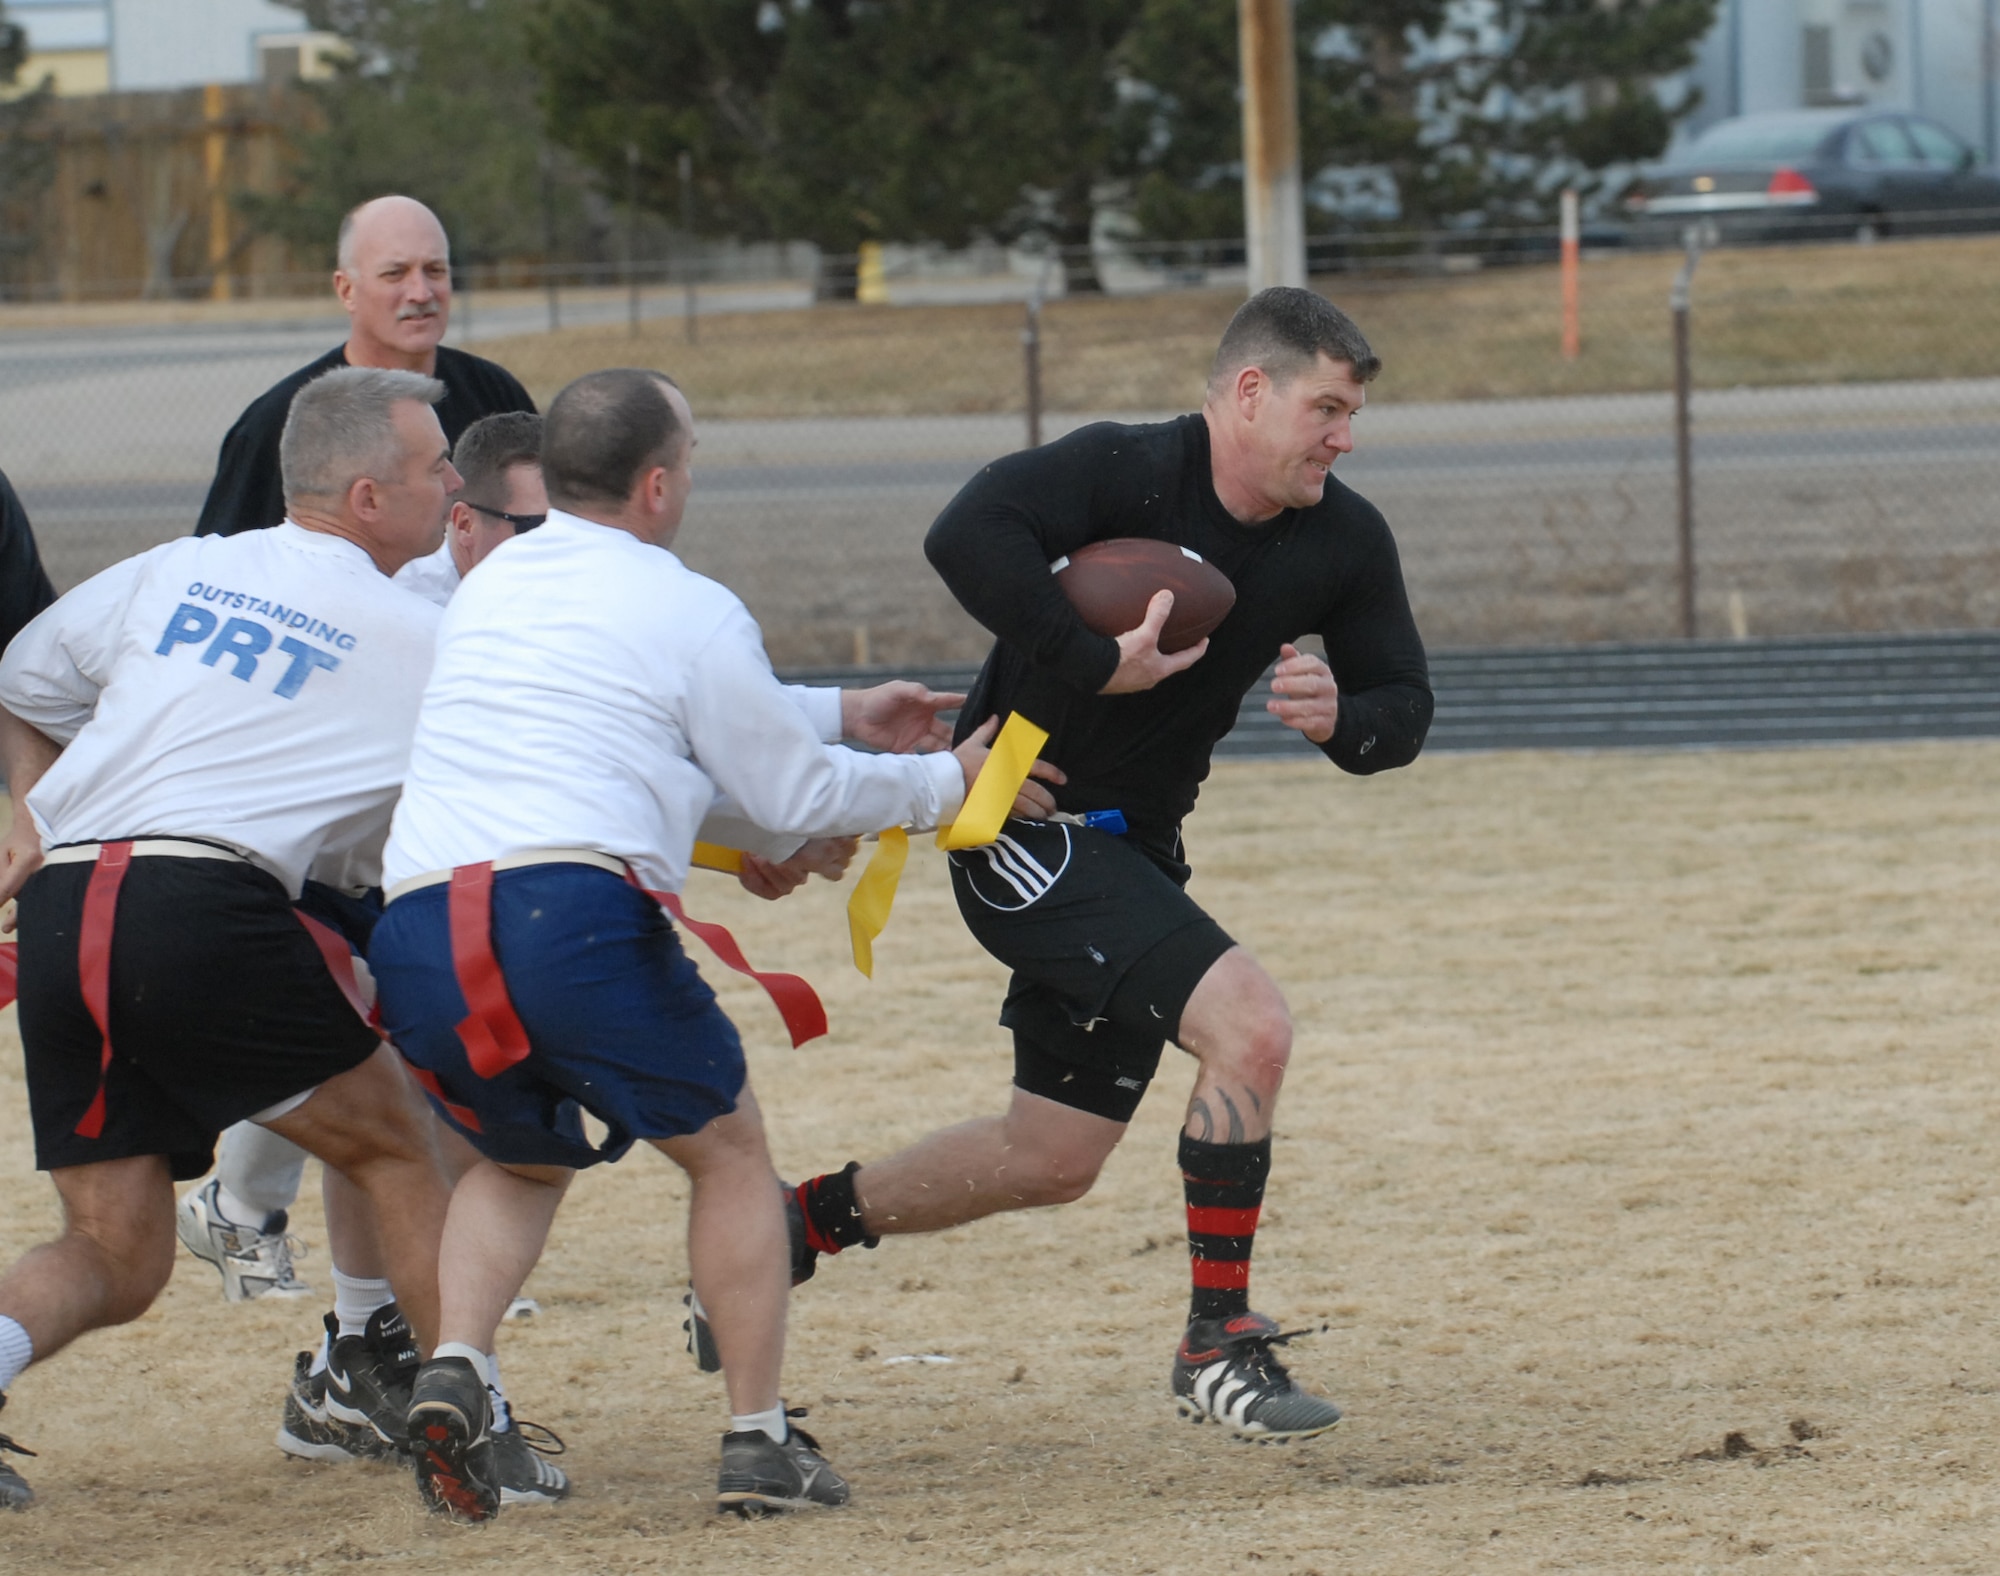 Jeff Beckford, Eagles/Commanders team member, breaks through the Chiefs/Shirts defense in a flag football game Dec. 14. The Chiefs slaughtered the Eagles, 31-0. (U.S. Air Force photo by Airman 1st Class Alex Gochnour)